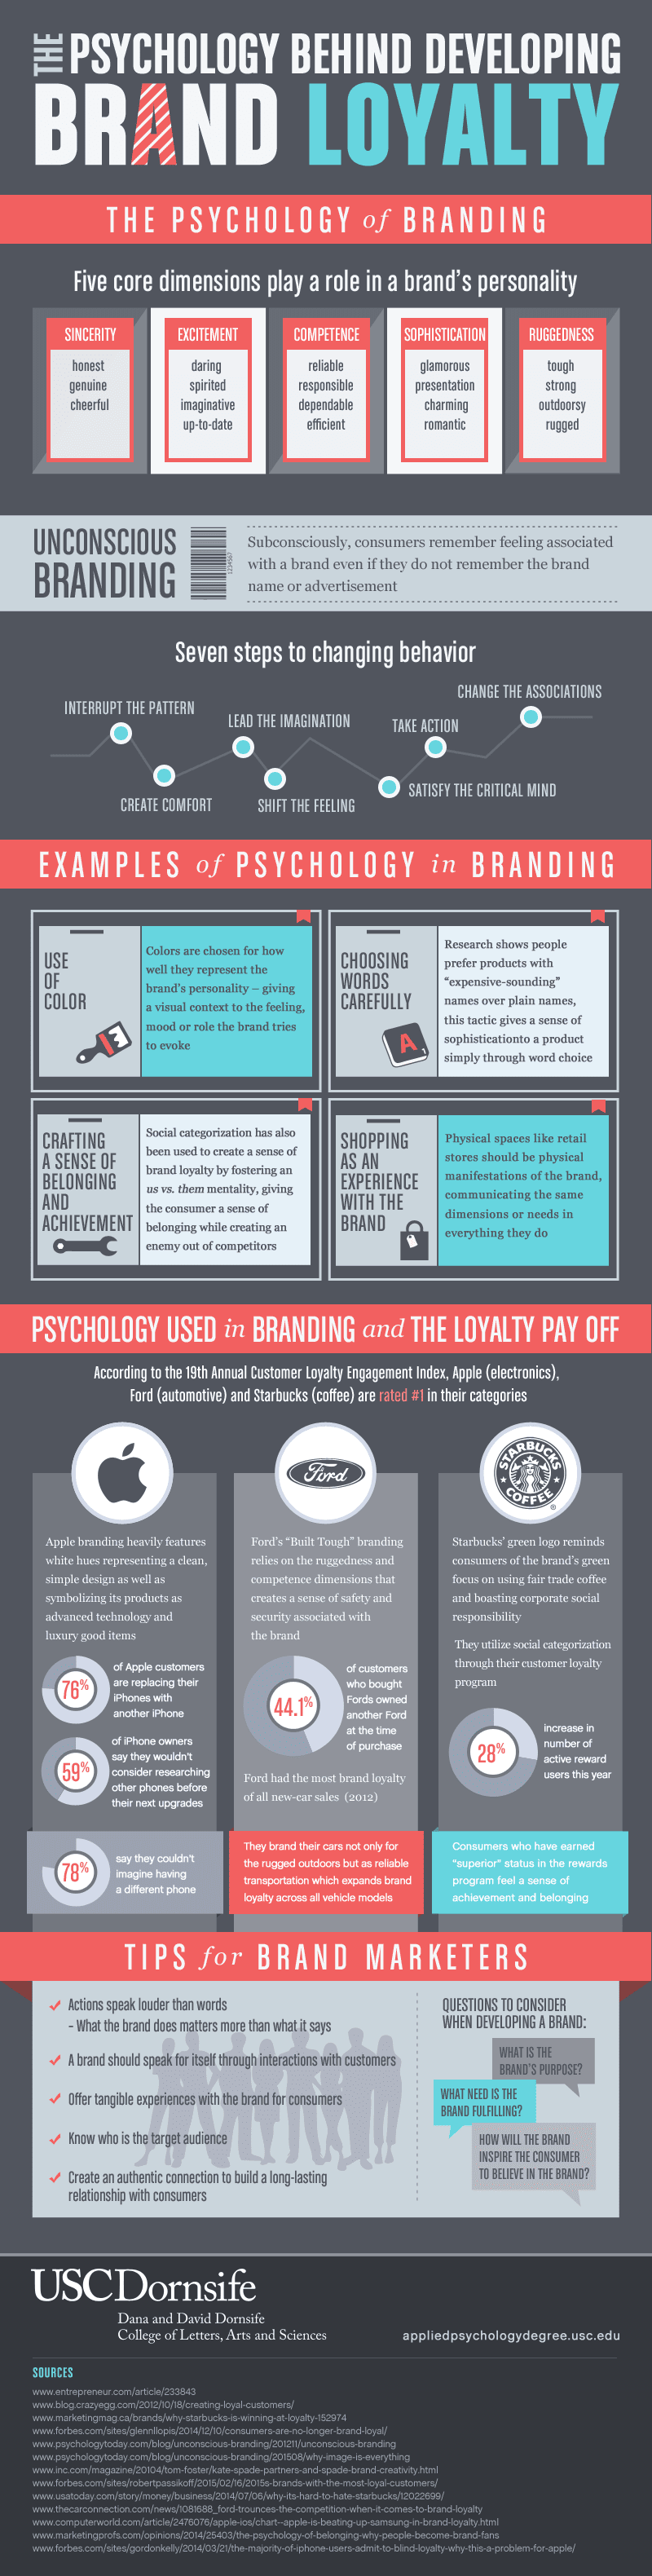 The Psychology Behind Developing Brand Loyalty - #infographic